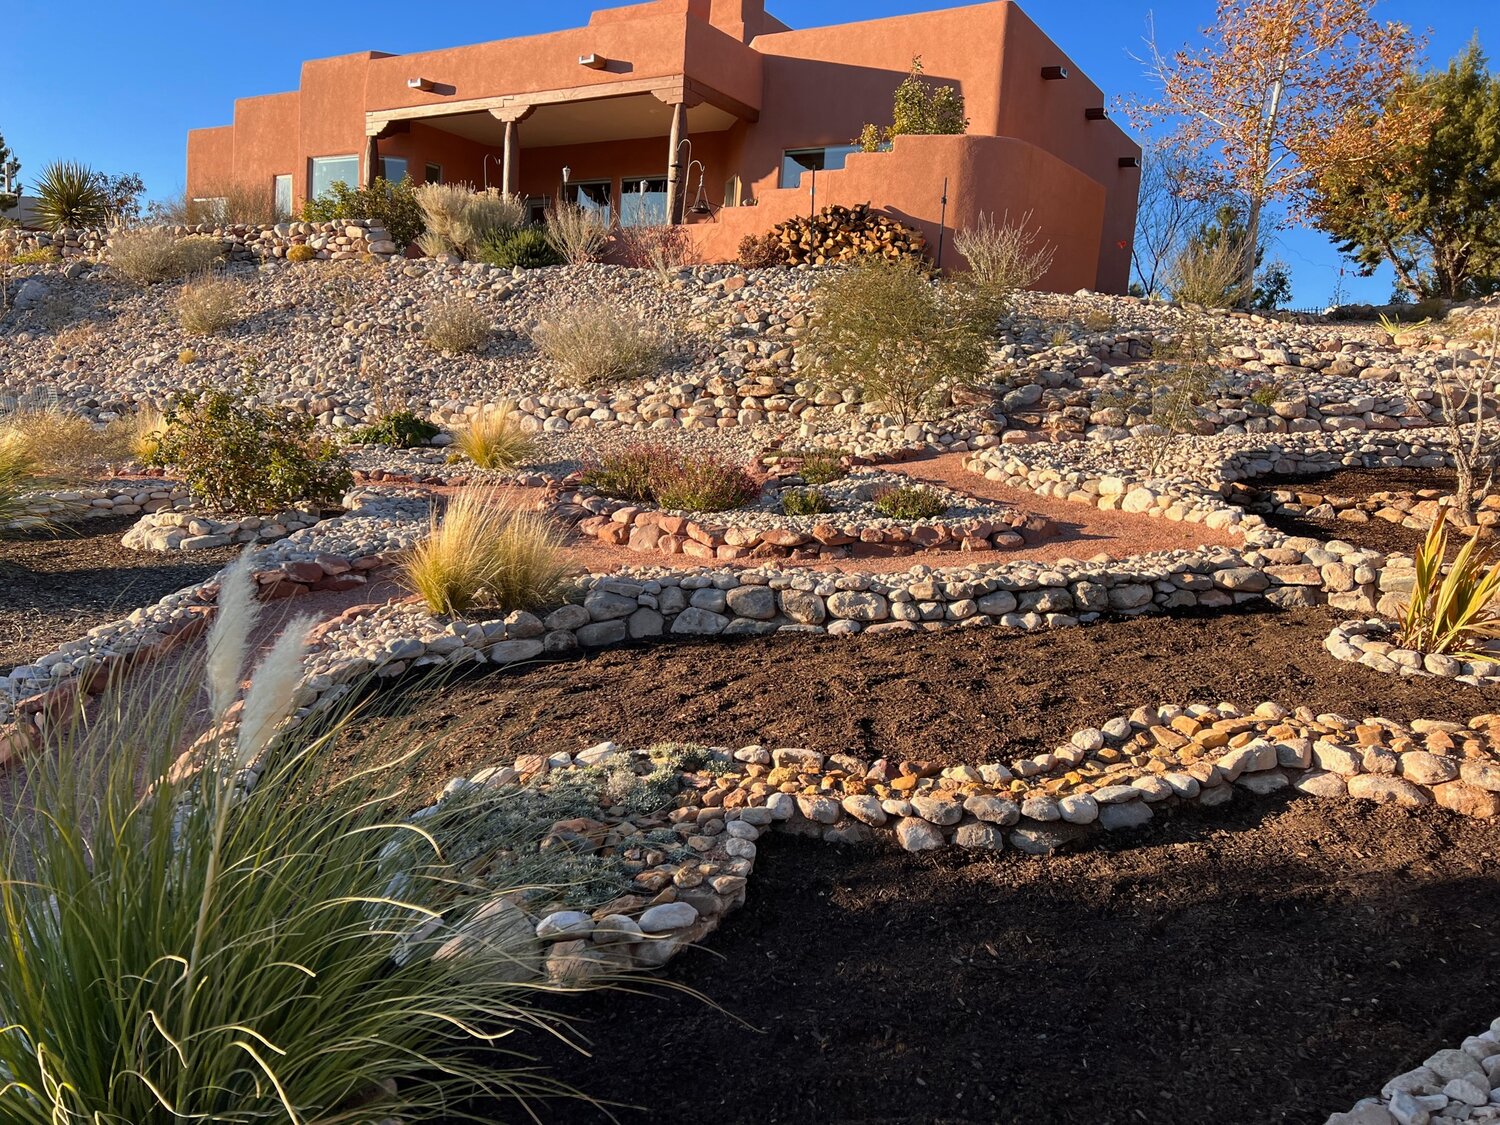 Yin and Hensley Terrace Back Property:
Rock lined terracing at the Flowing Garden diverts rain water and helps with erosion control.